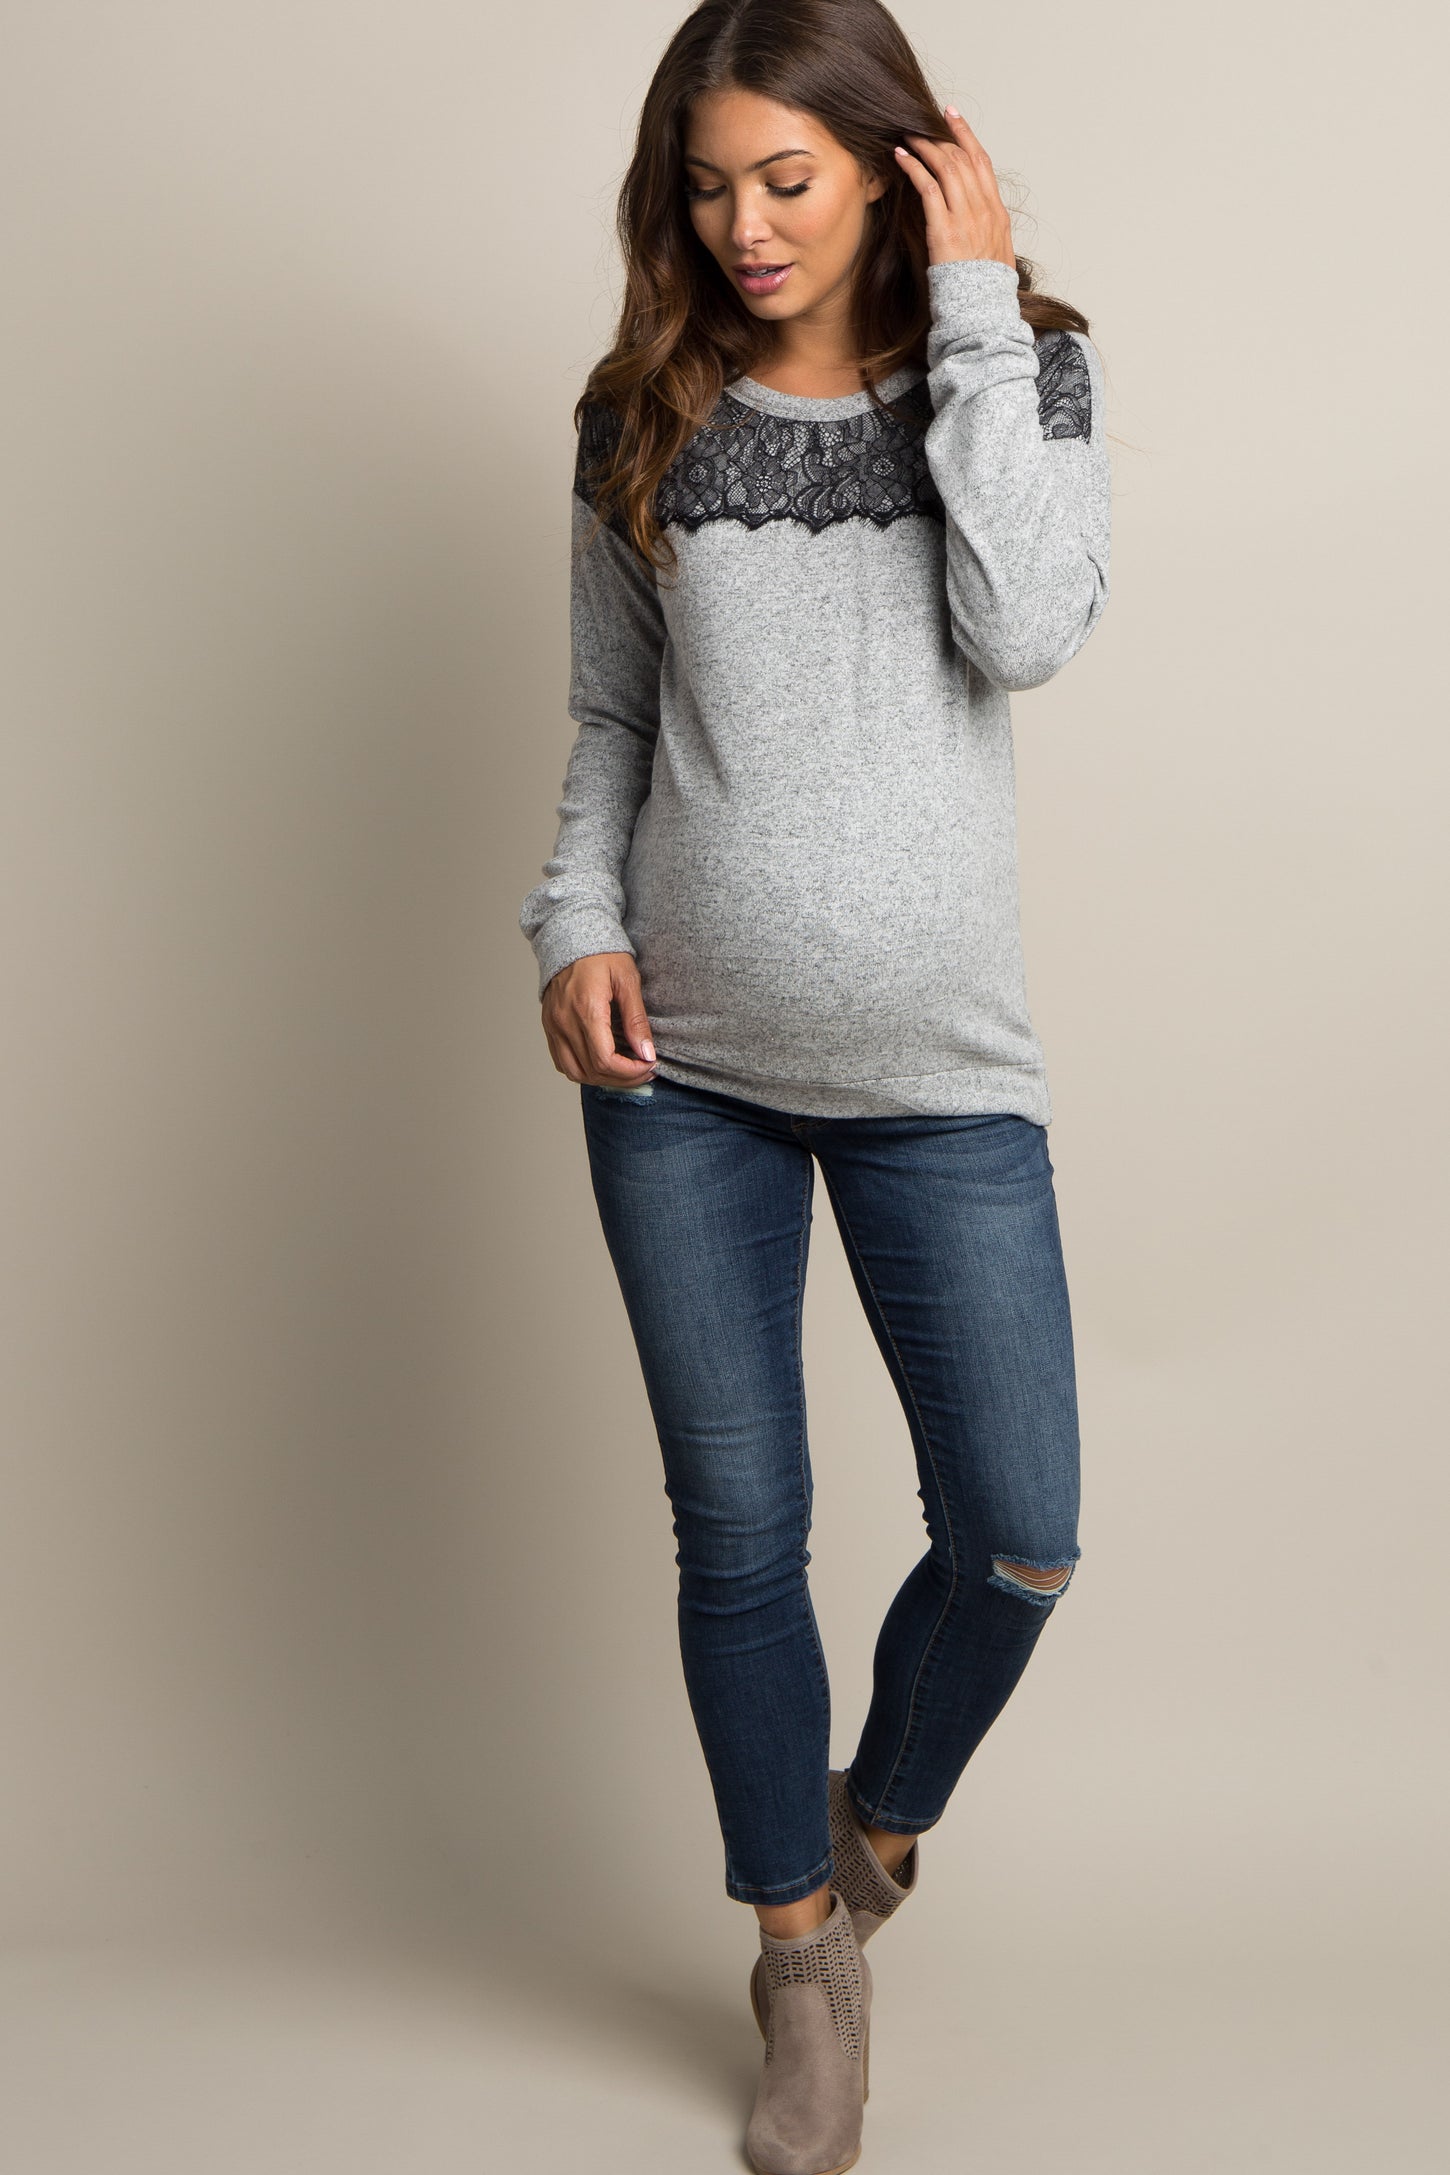 Grey Lace Accent Soft Knit Maternity Sweater